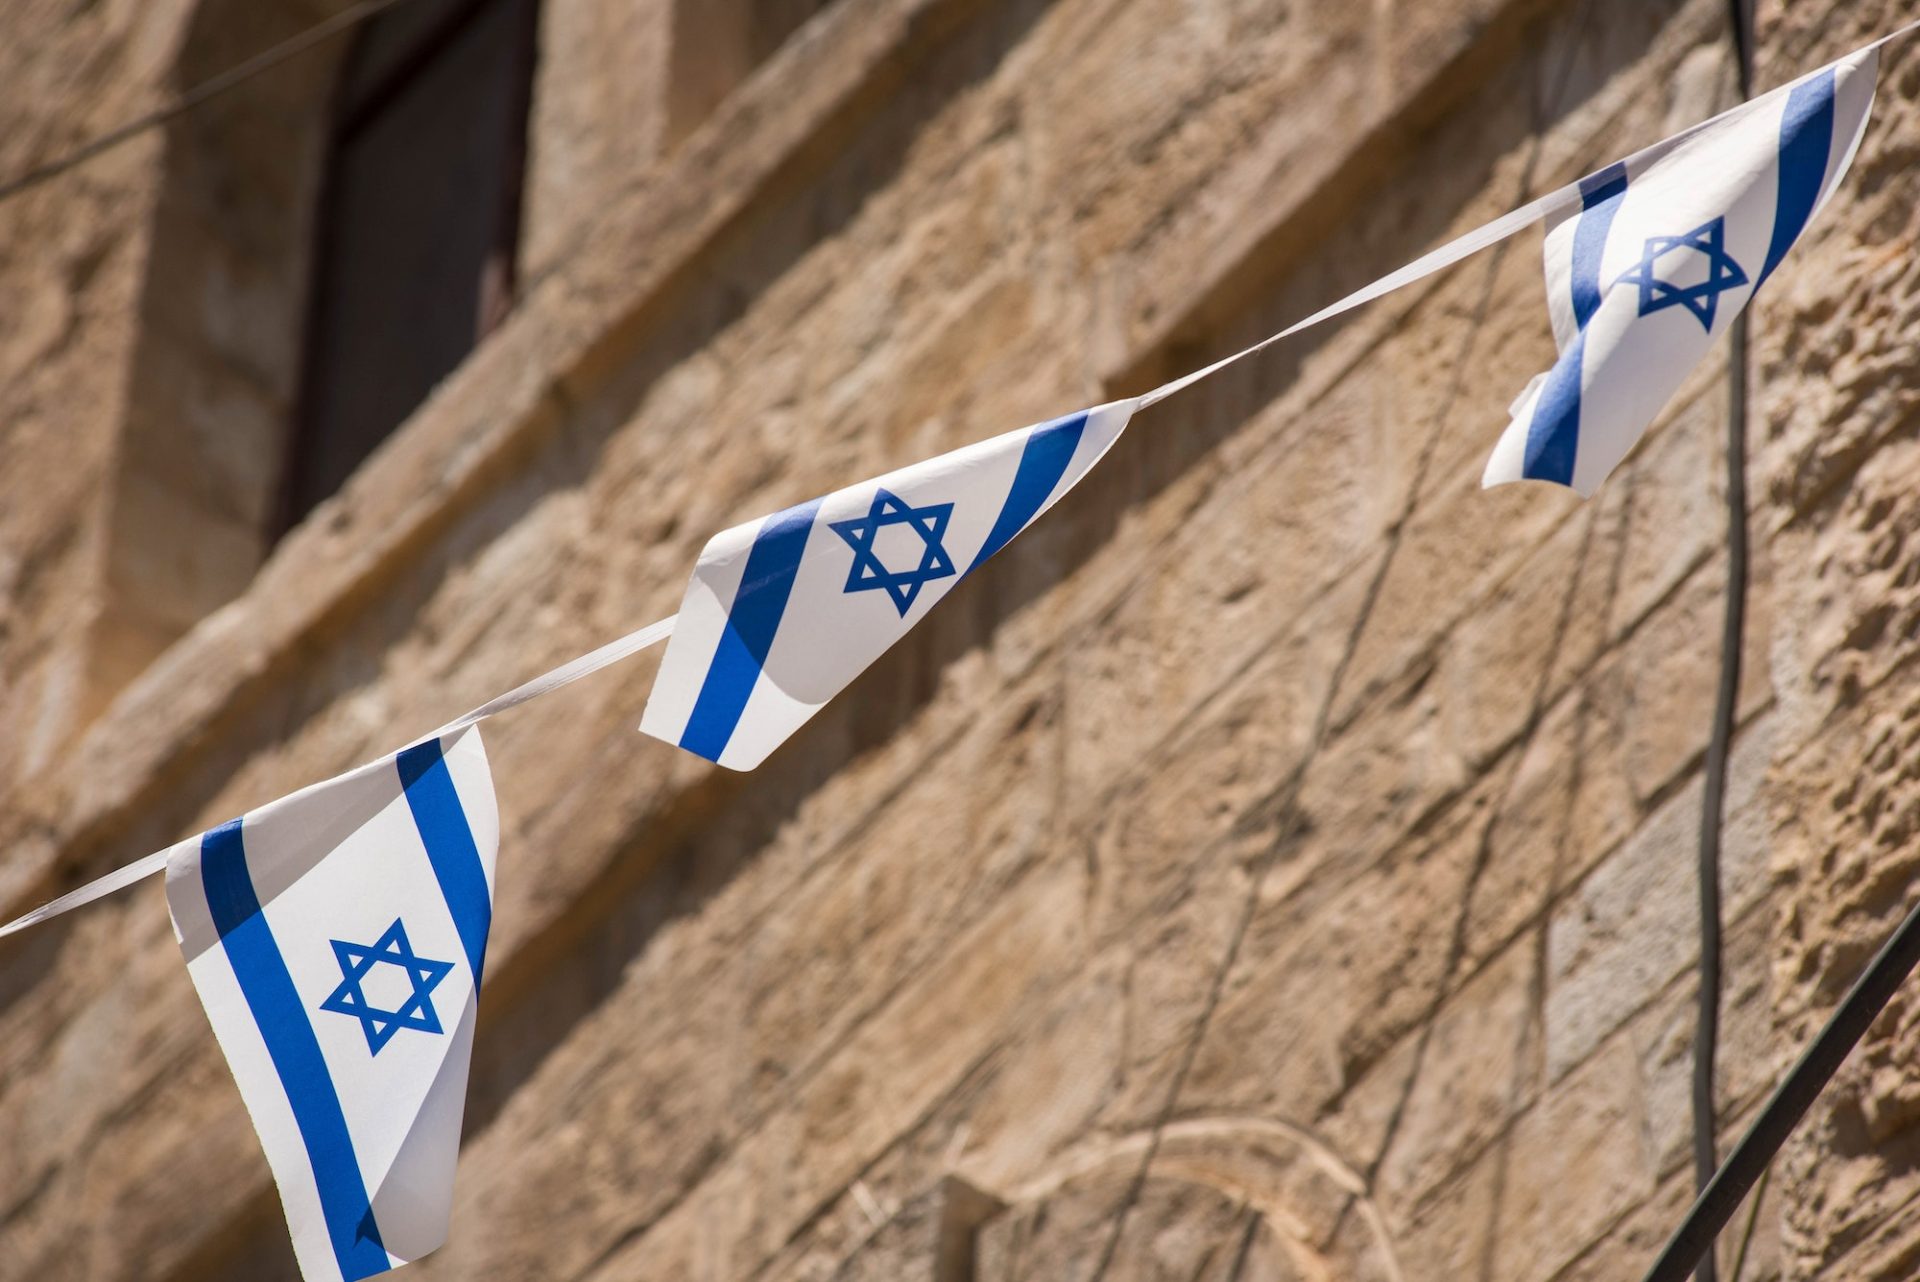 The flag of Israel blowing in the wind. Star of David